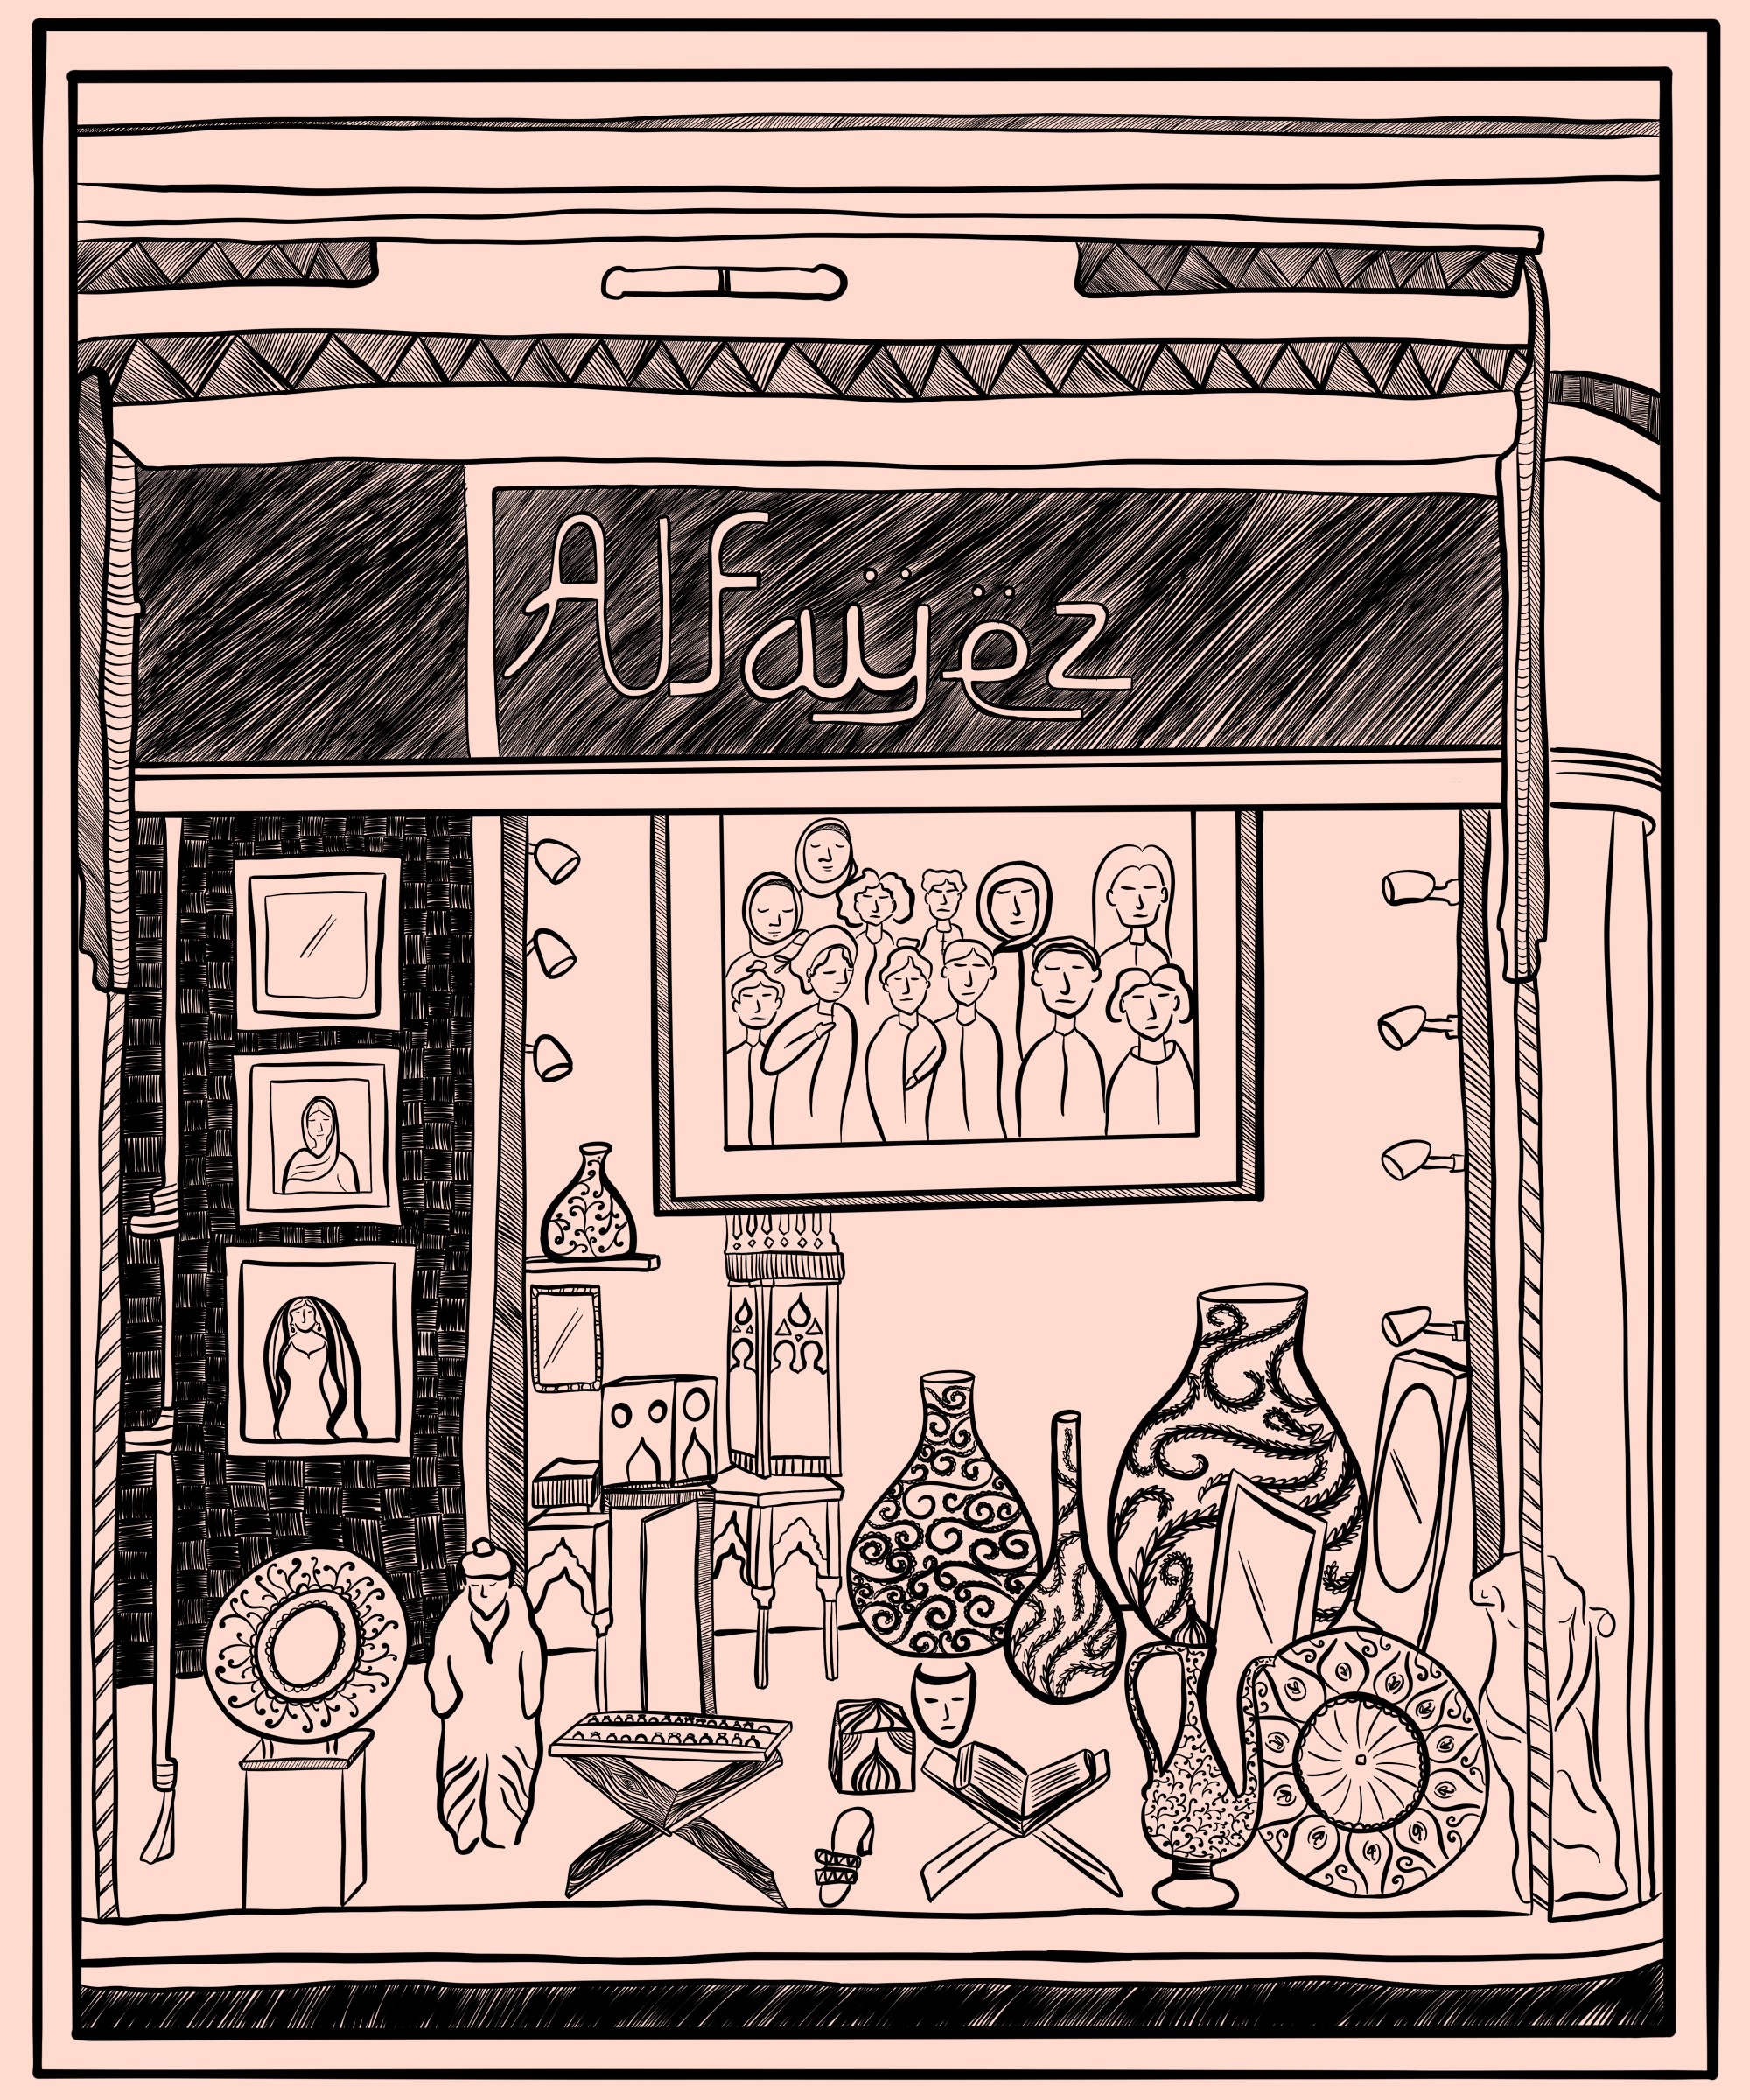 An illustration of Alfayez, a Middle Eastern antique and import store in London. Statues, vases, lanterns, dishes, books all decorate the storefront window.